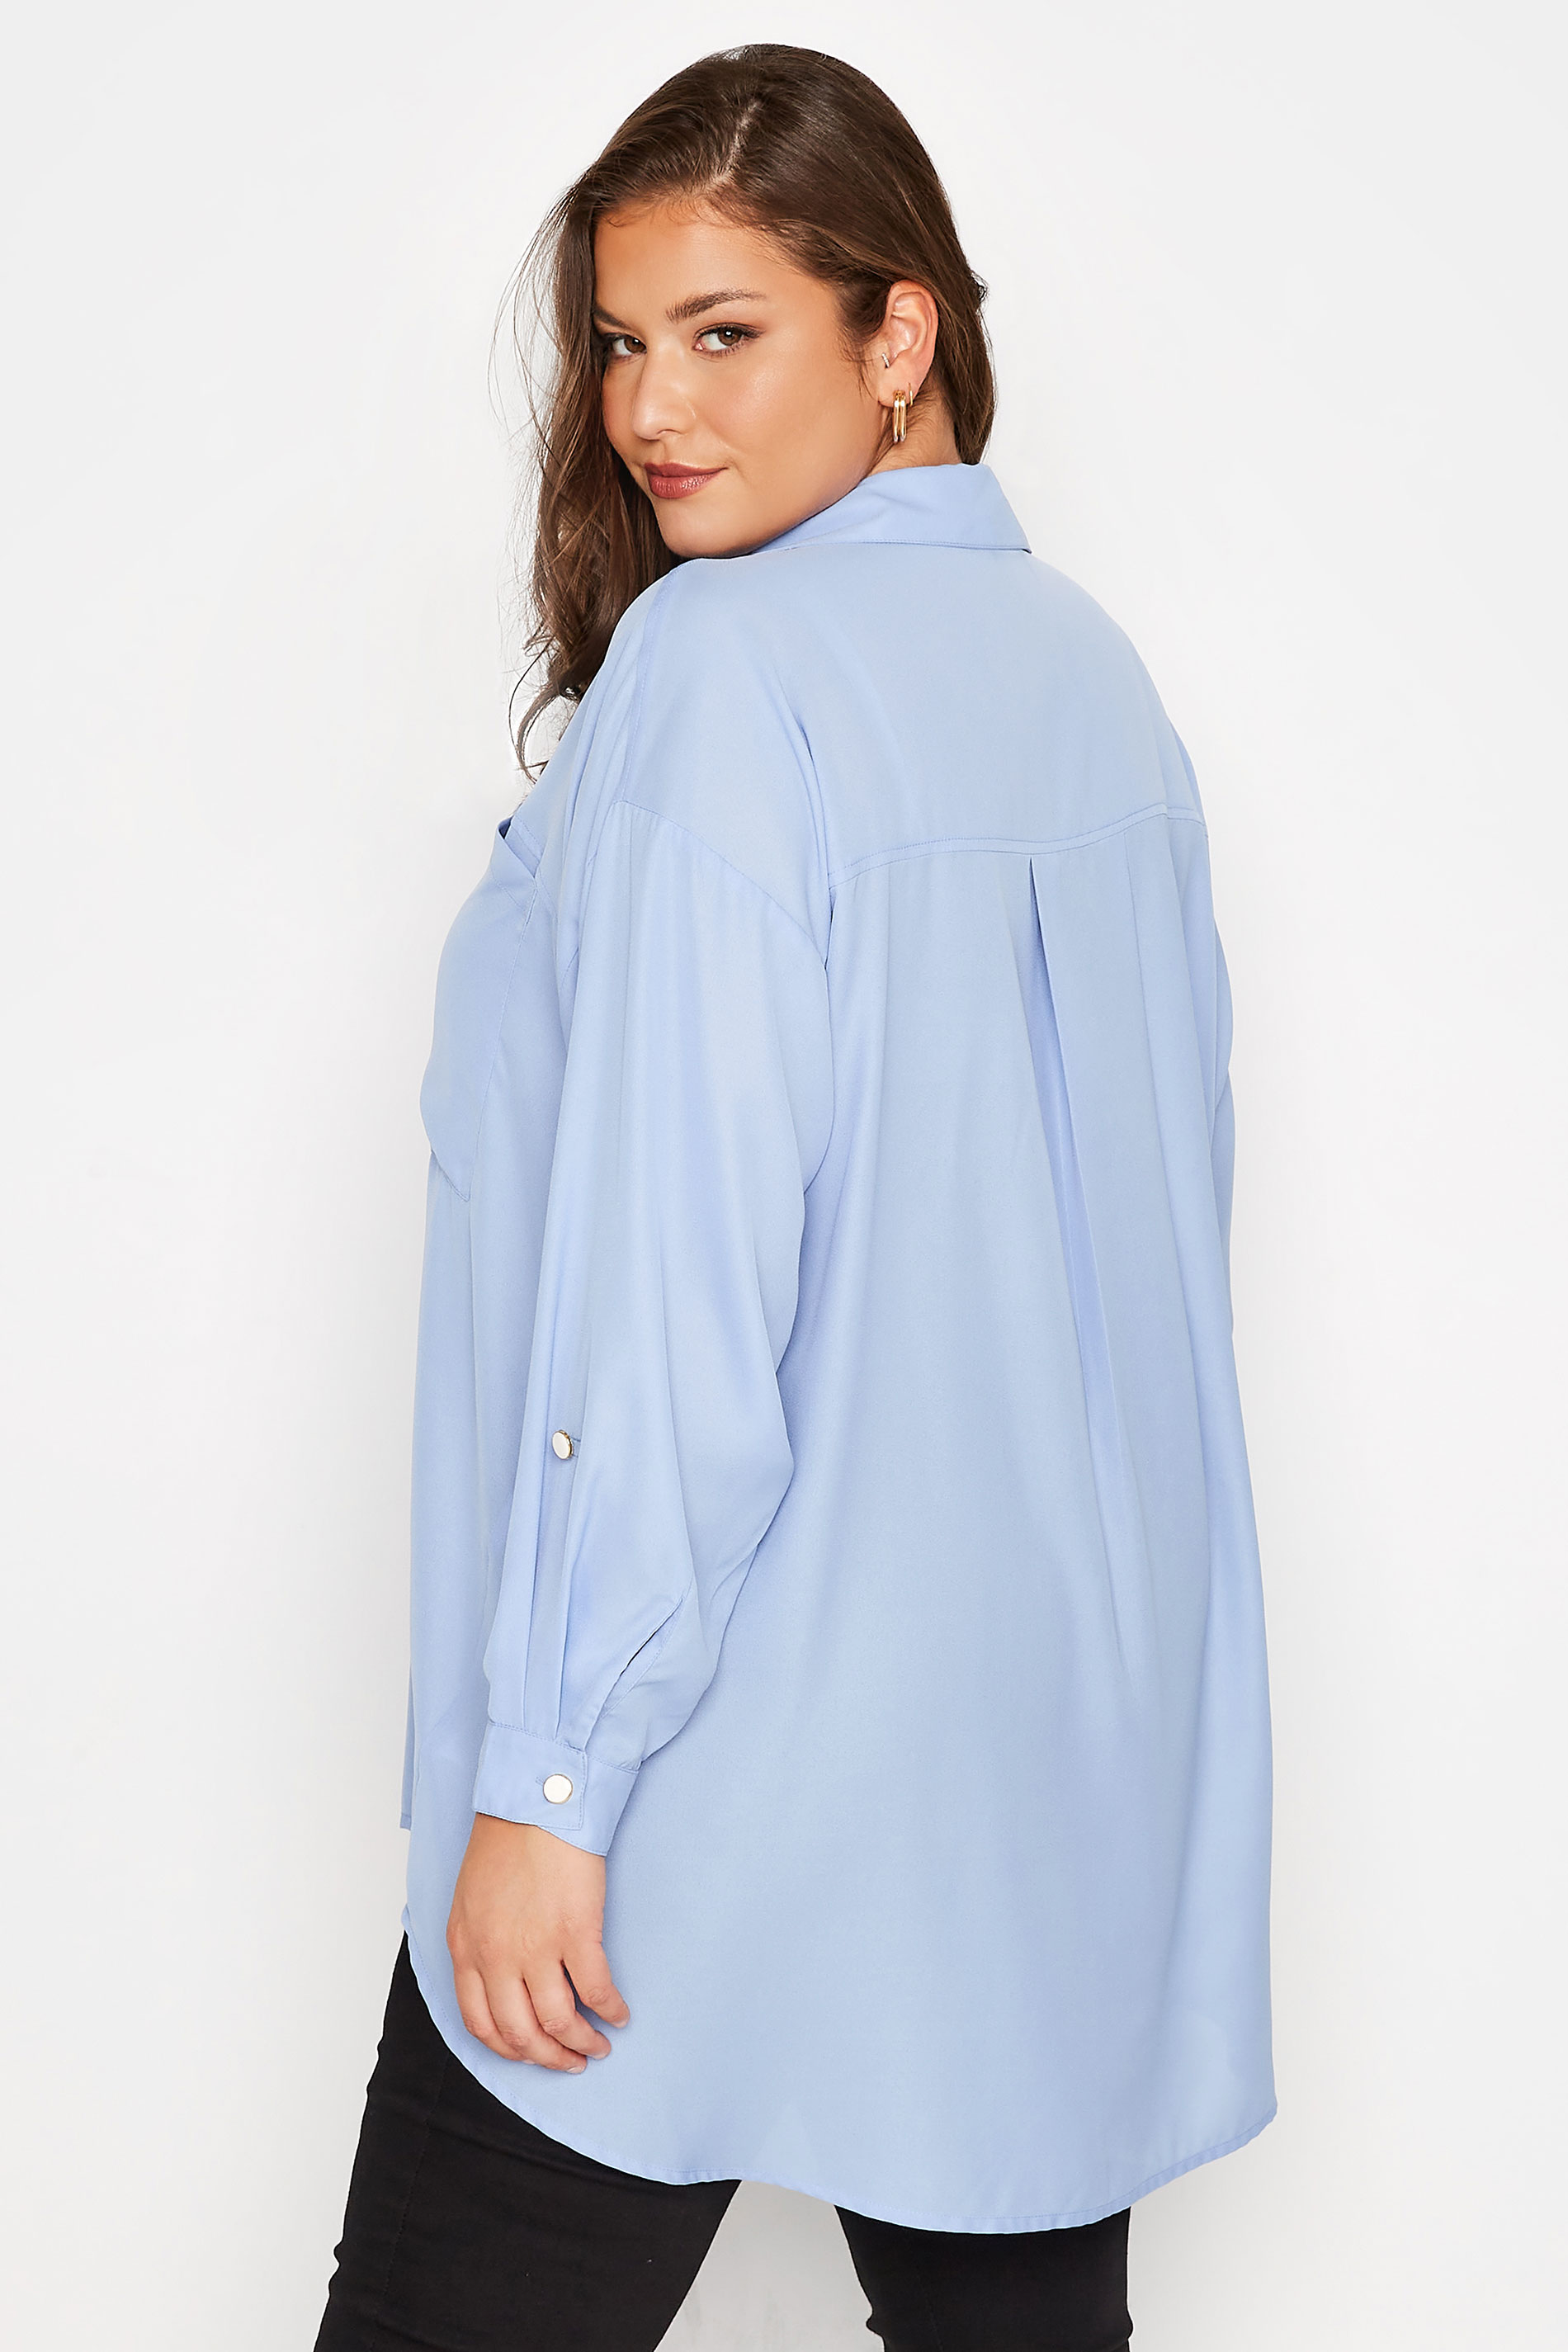 LIMITED COLLECTION Plus Size Light Blue Utility Pocket Shirt | Yours Clothing 3